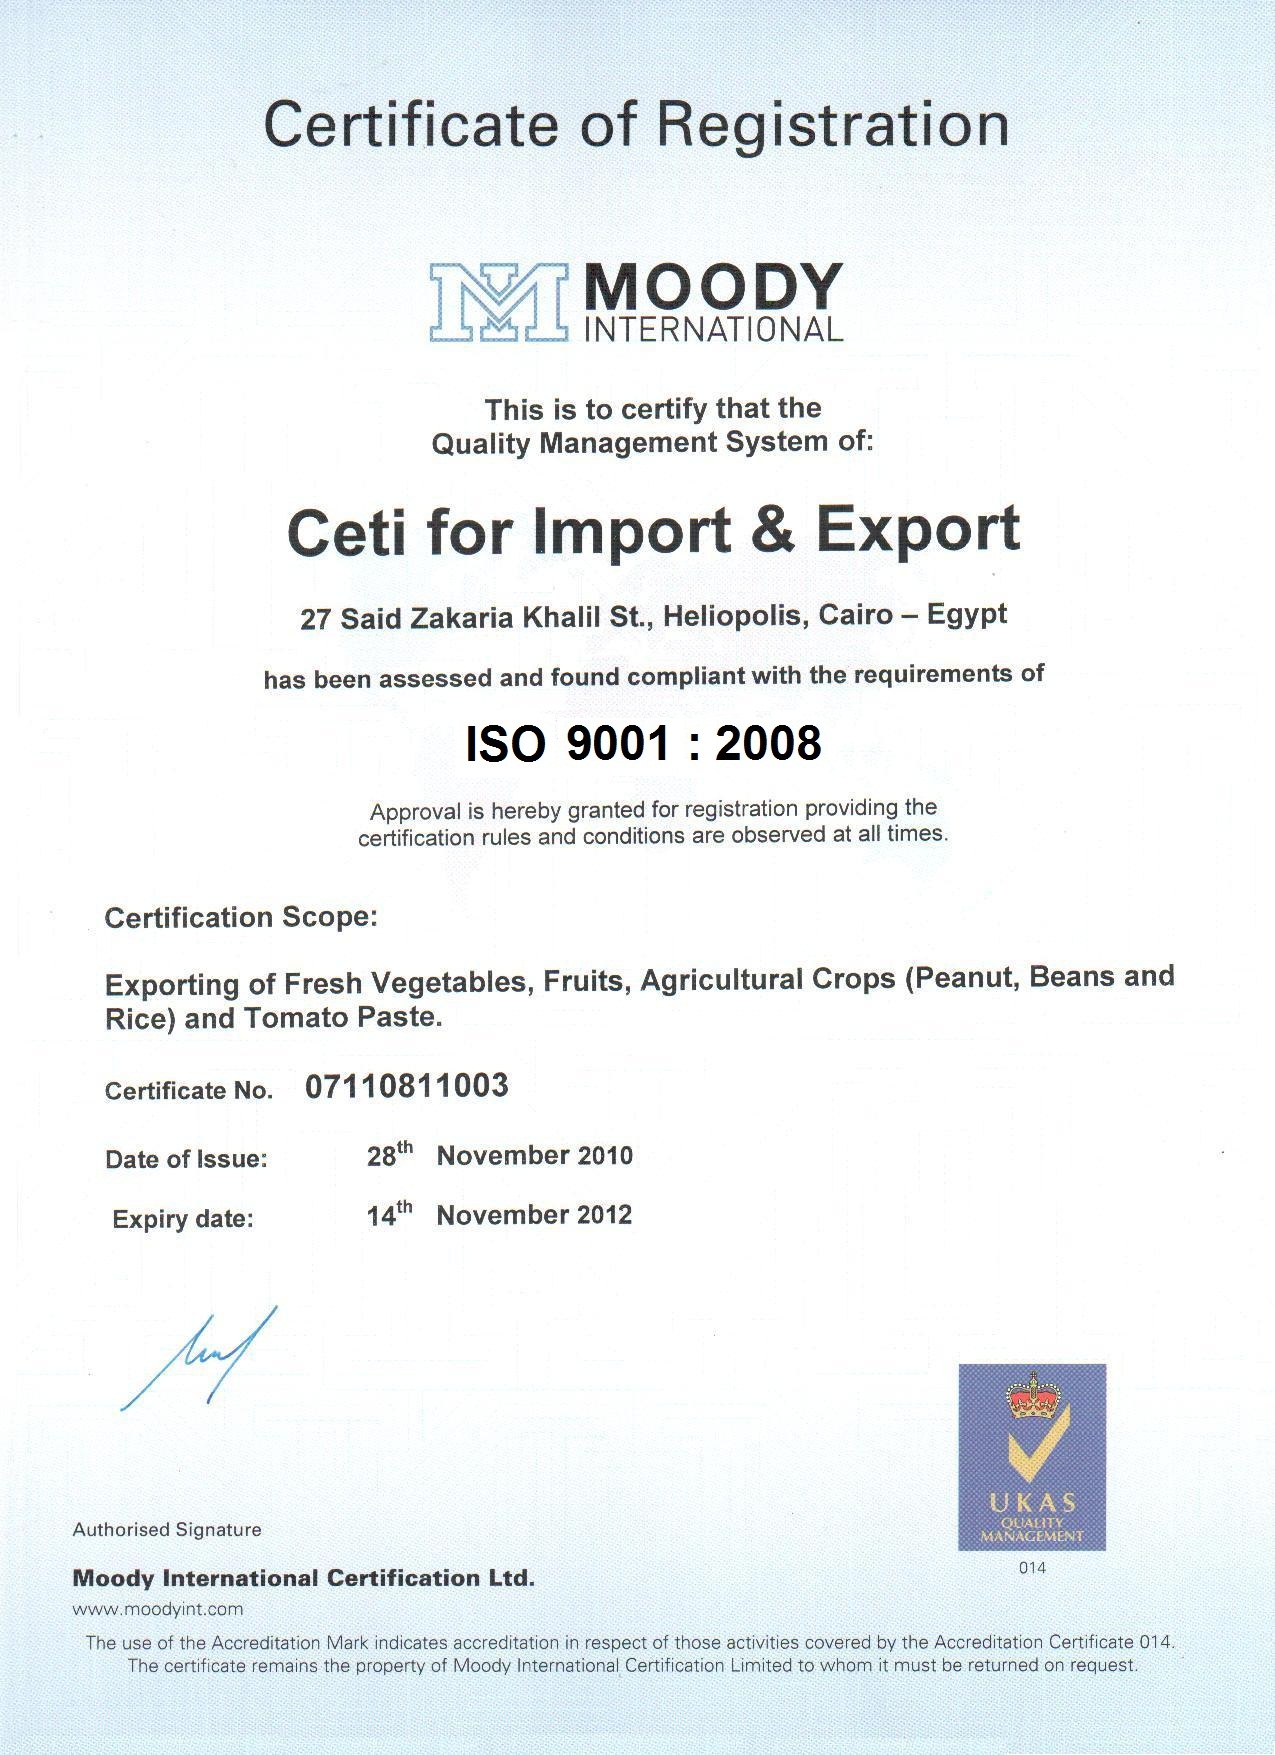 ISO 9001/ 2008